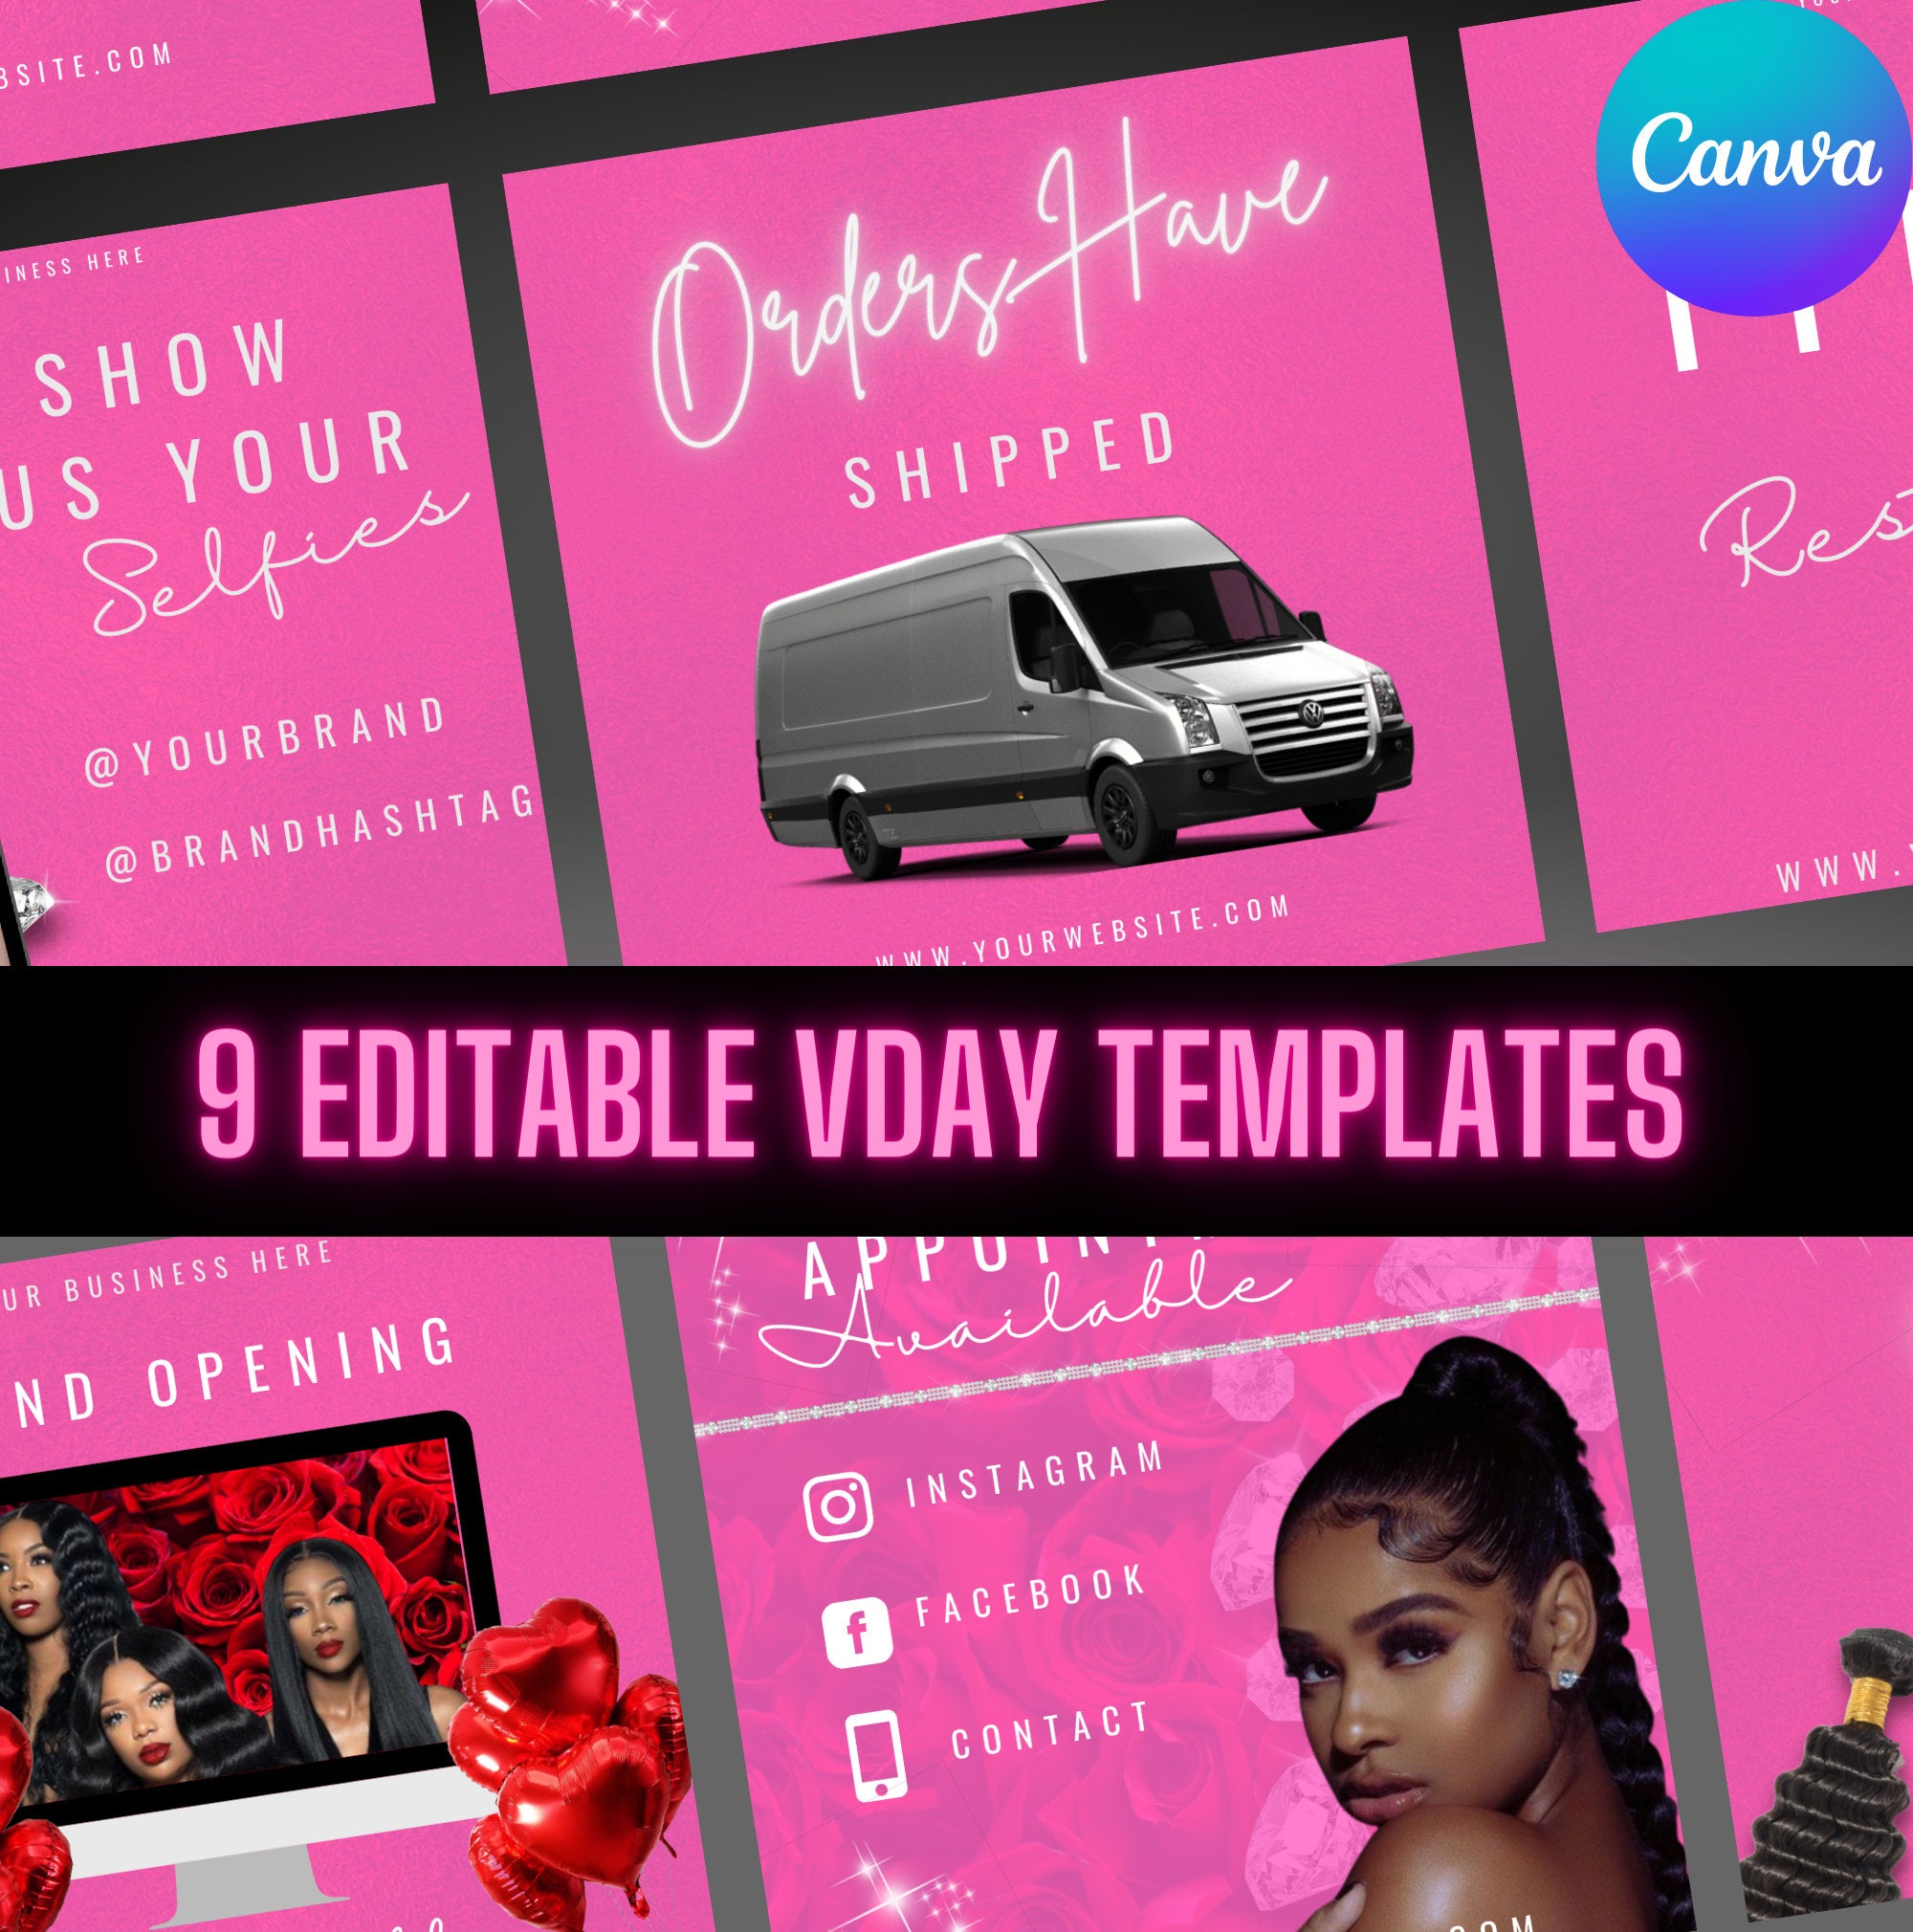 9 Editable Templates- Subscribe Now Flyer, Thank You Flyer, Order Shipped Flyers, Hair Bundle Flyer